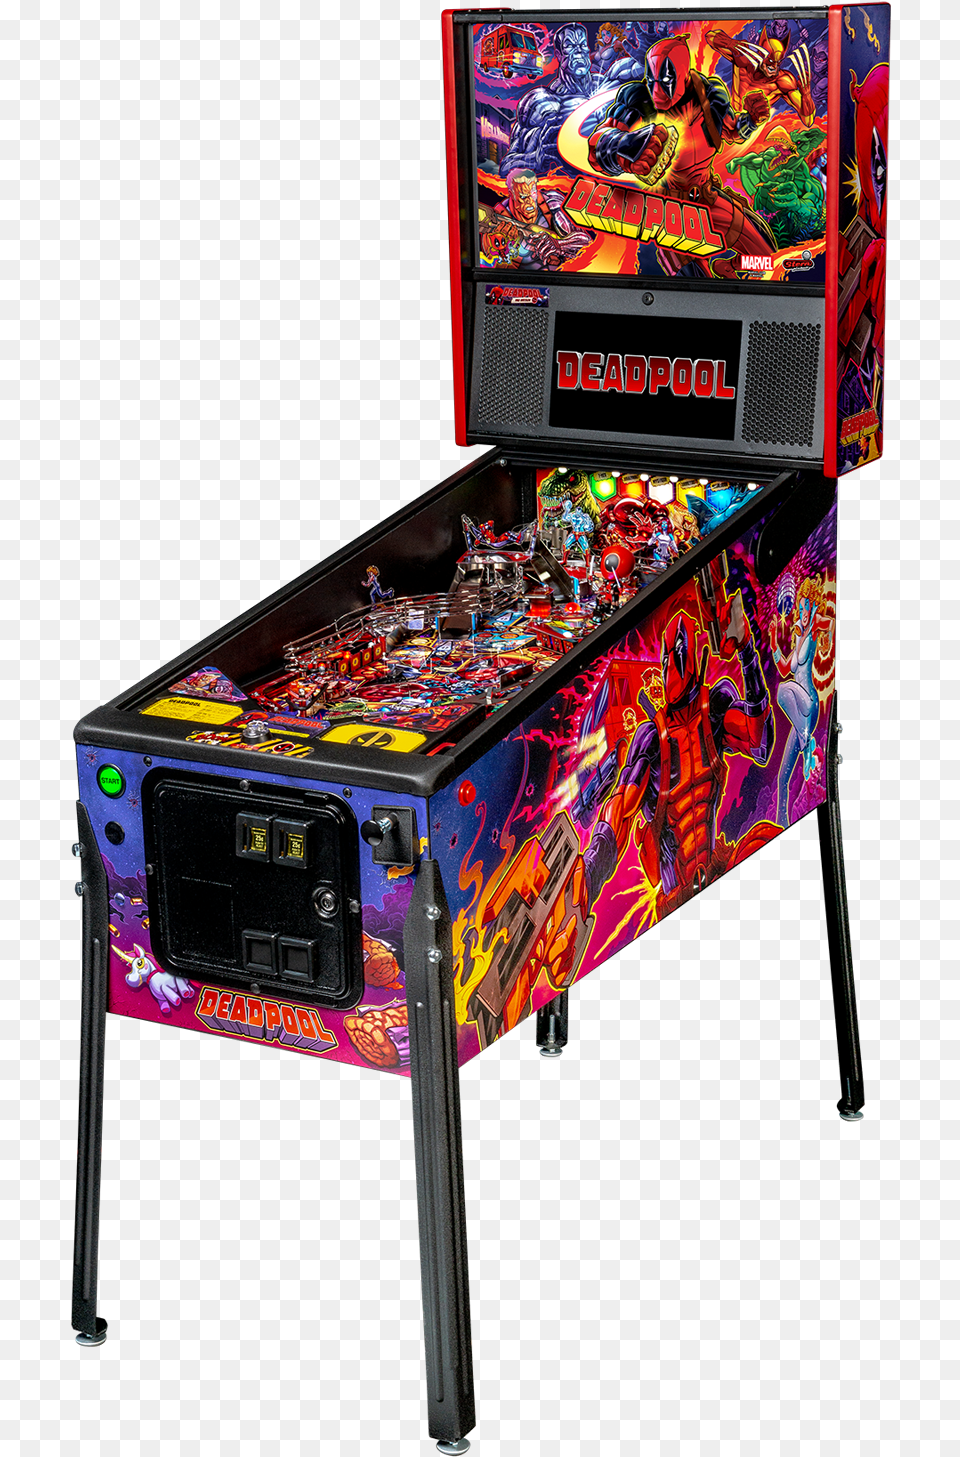 Pro Stern Pinball Deadpool, Arcade Game Machine, Game, Person Png Image